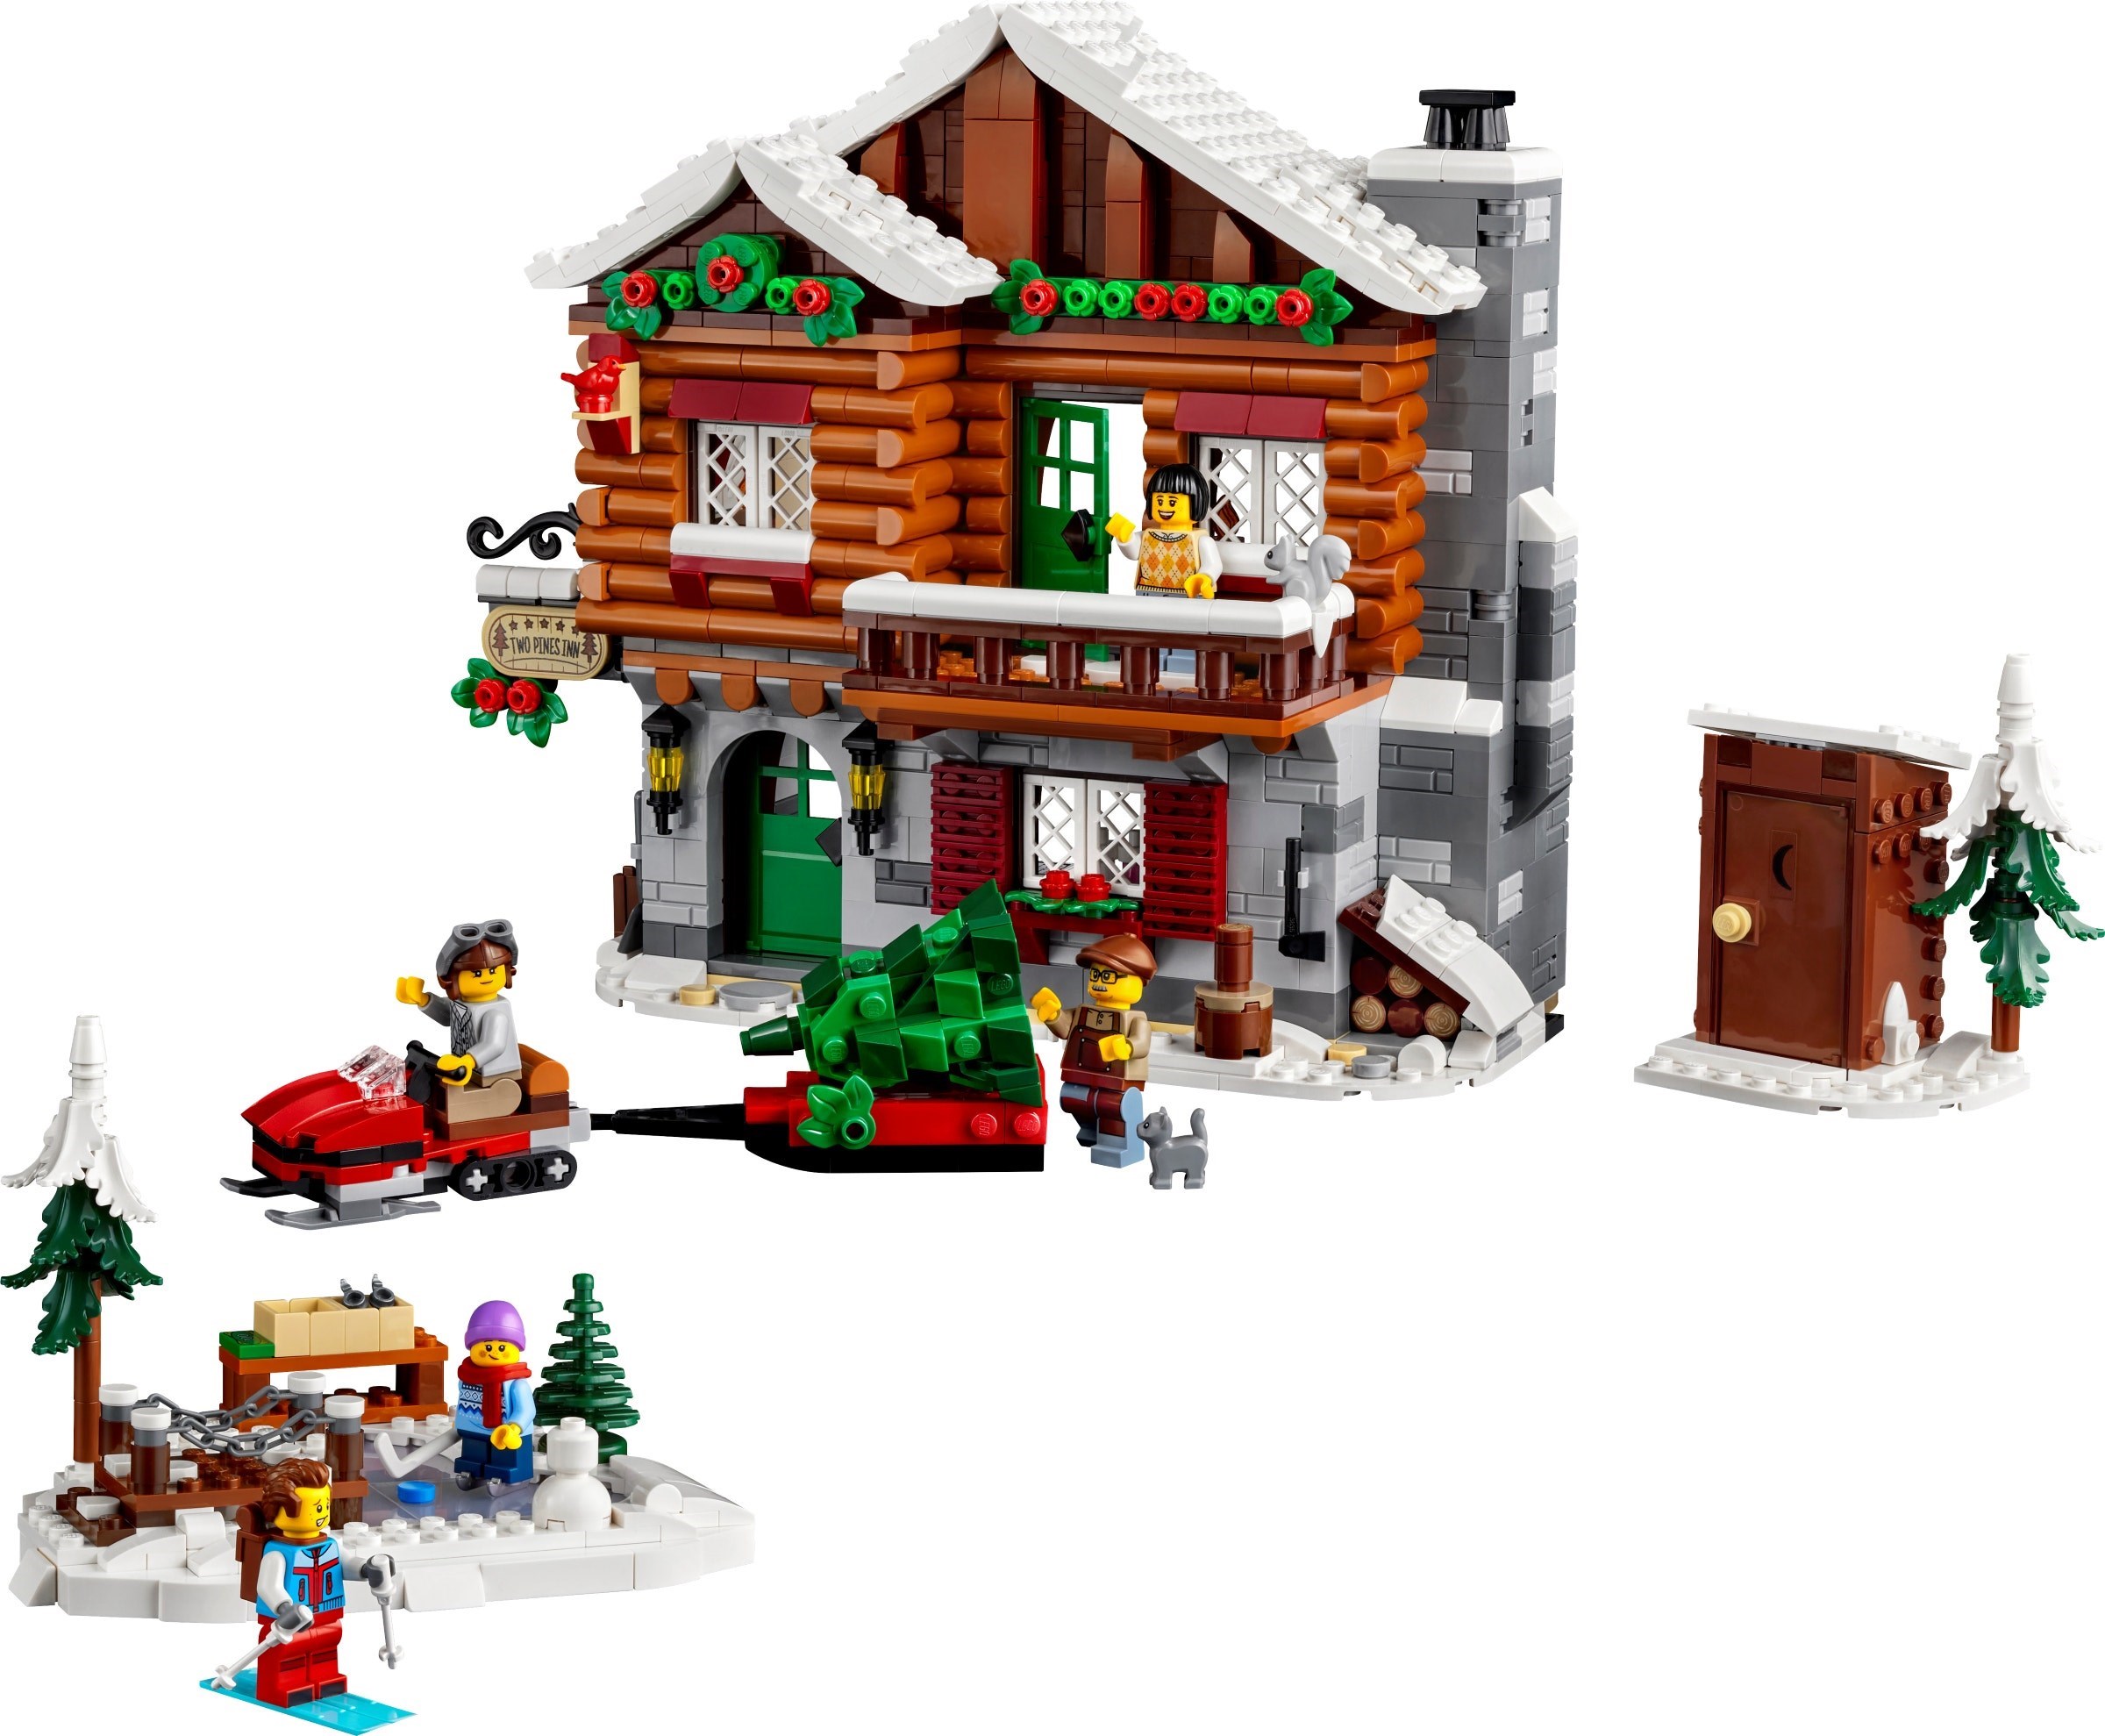 This year's Winter Village set revealed!